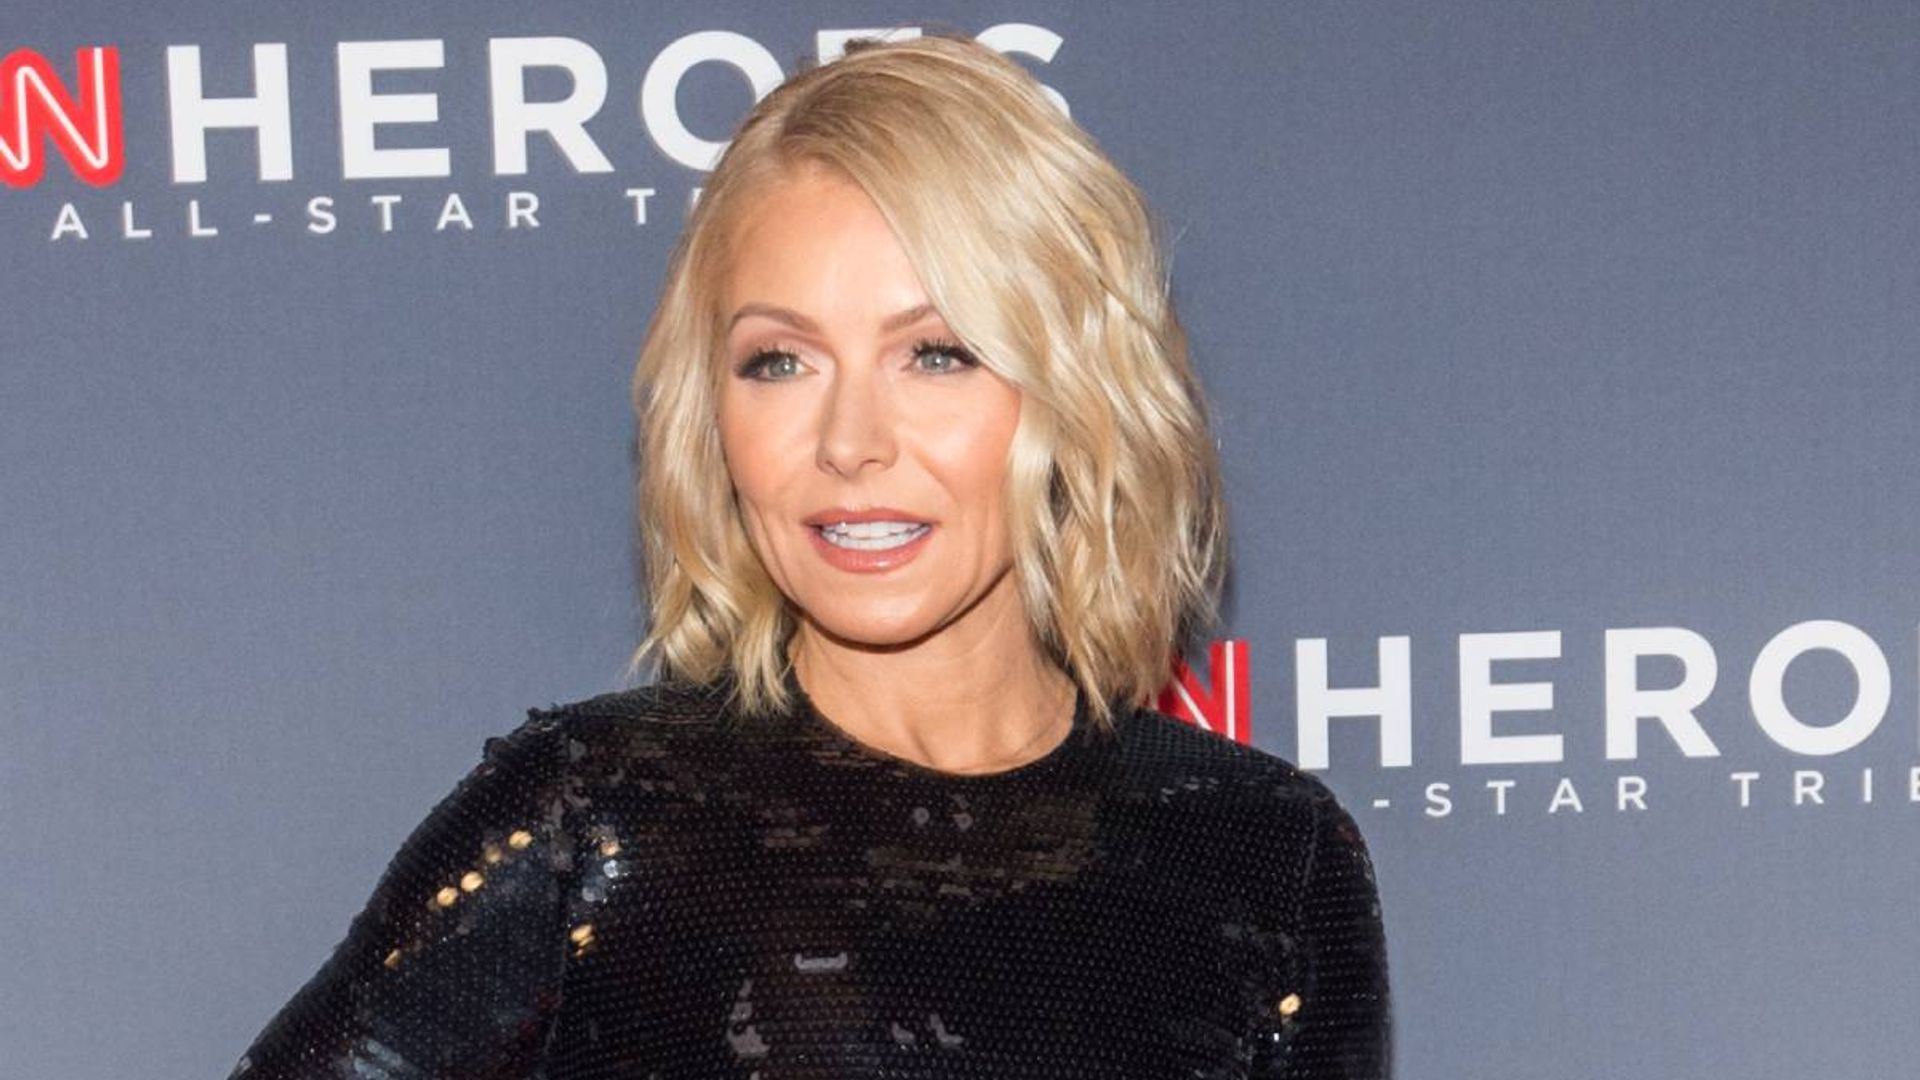 Kelly Ripa makes impassioned plea to viewers following Texas tragedy